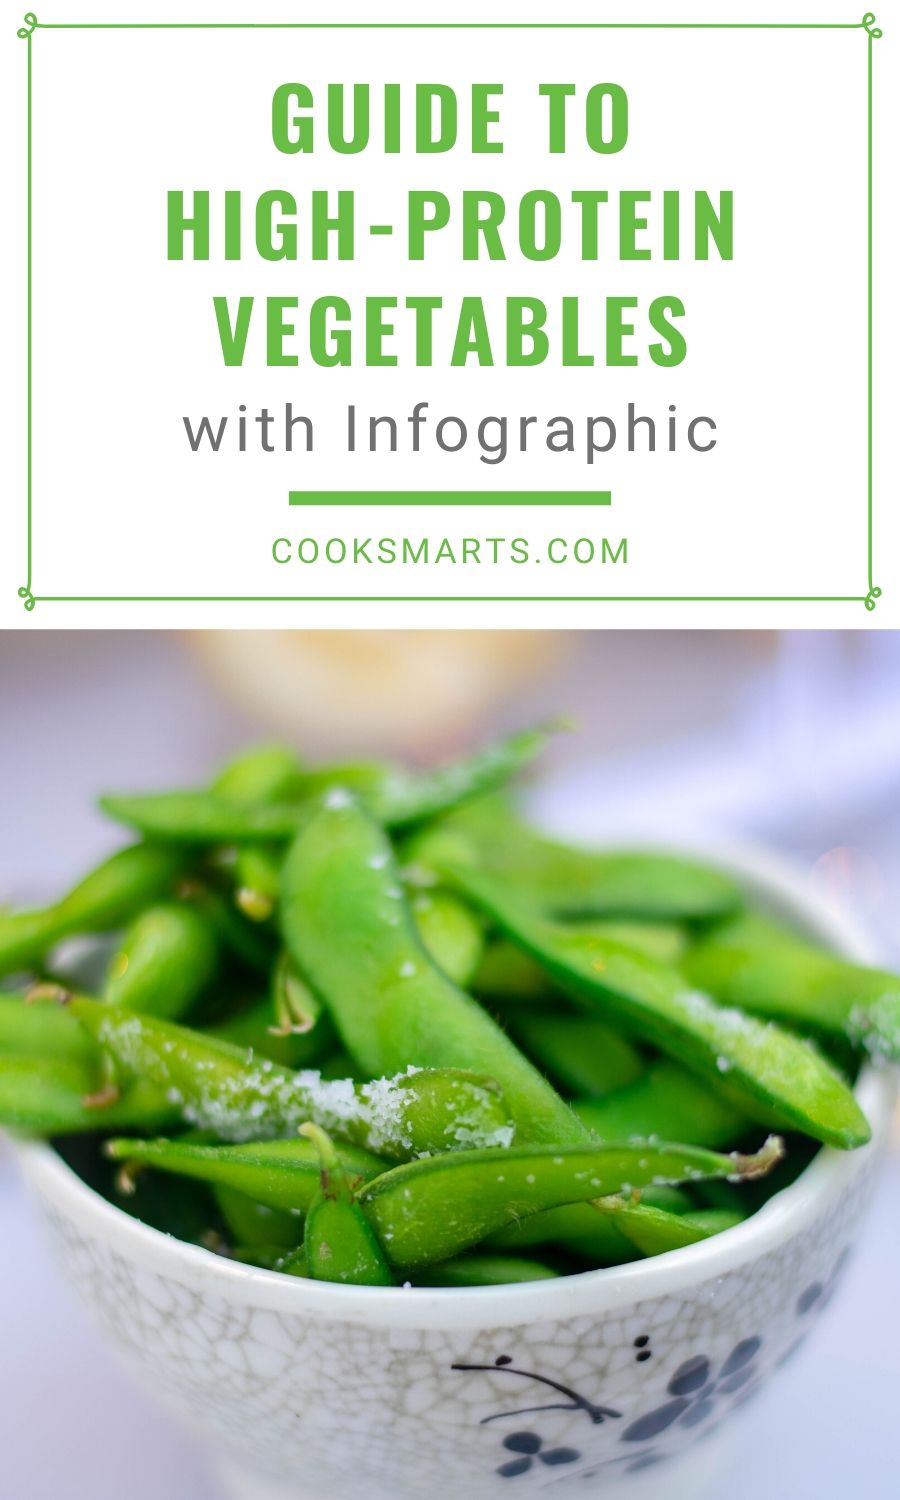 Guide to Protein-Packed Veggies | Cook Smarts Infographic